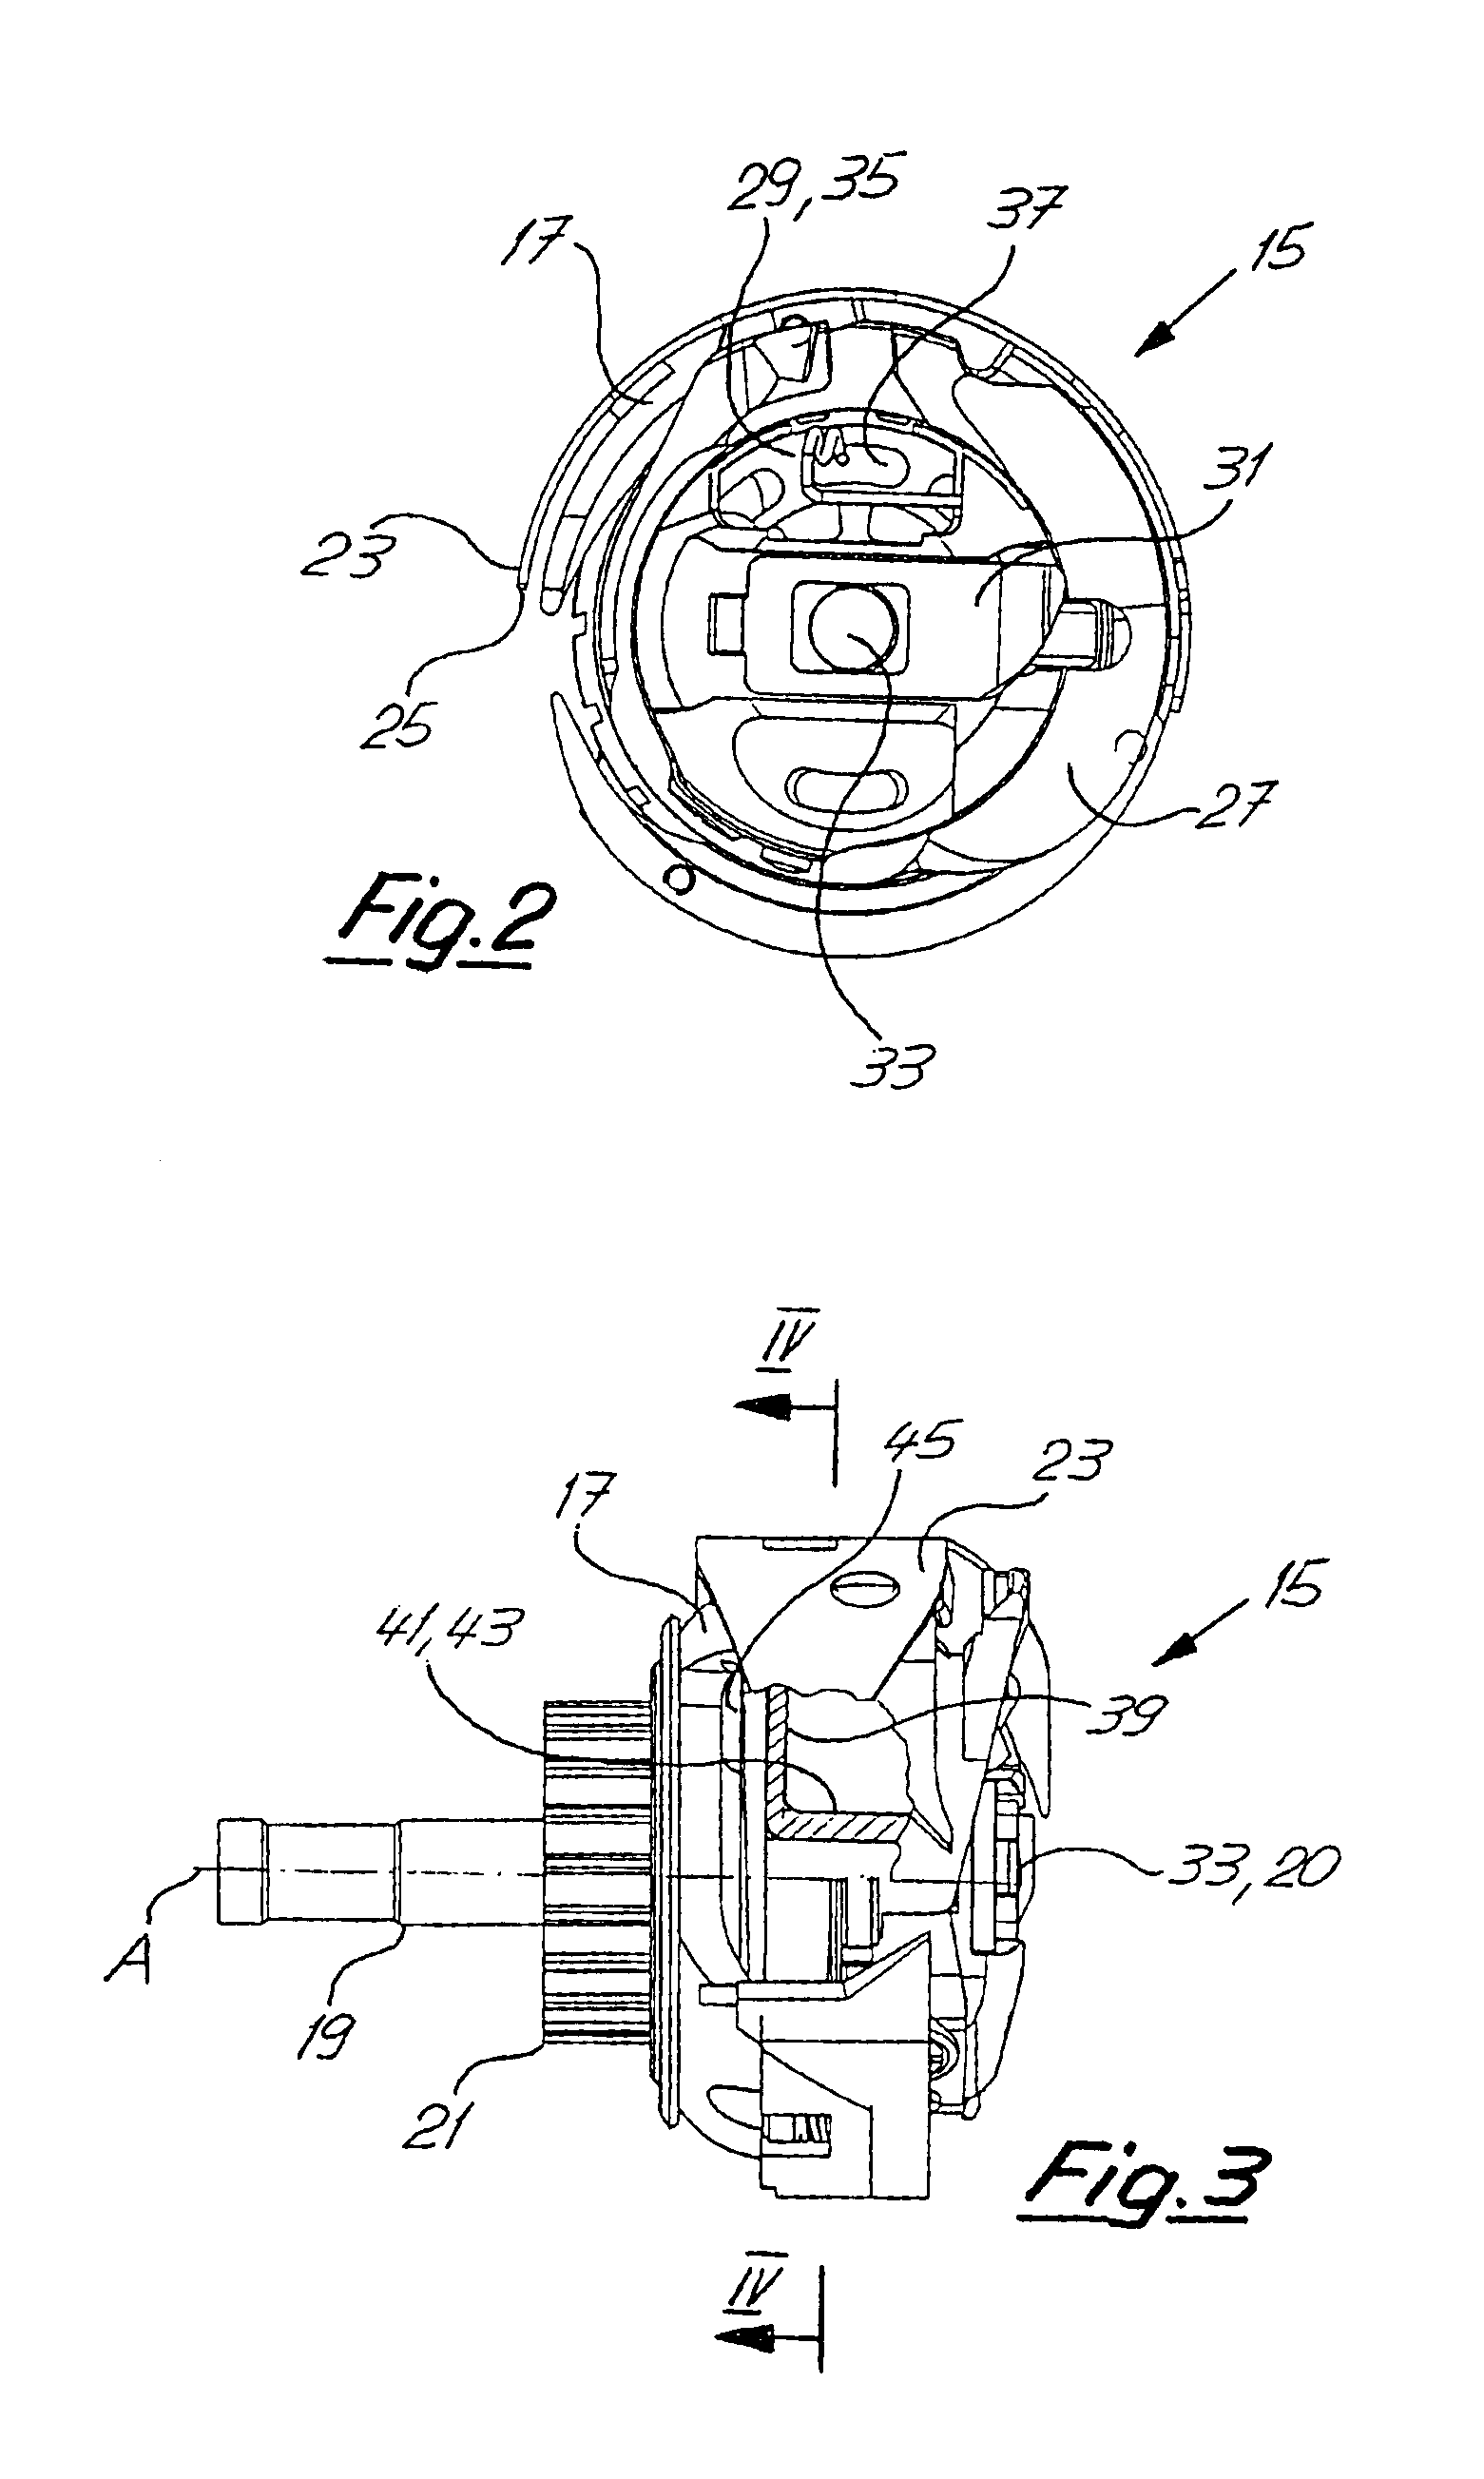 Method for determining a lower thread supply, and a sewing machine having a lower thread supply monitoring device